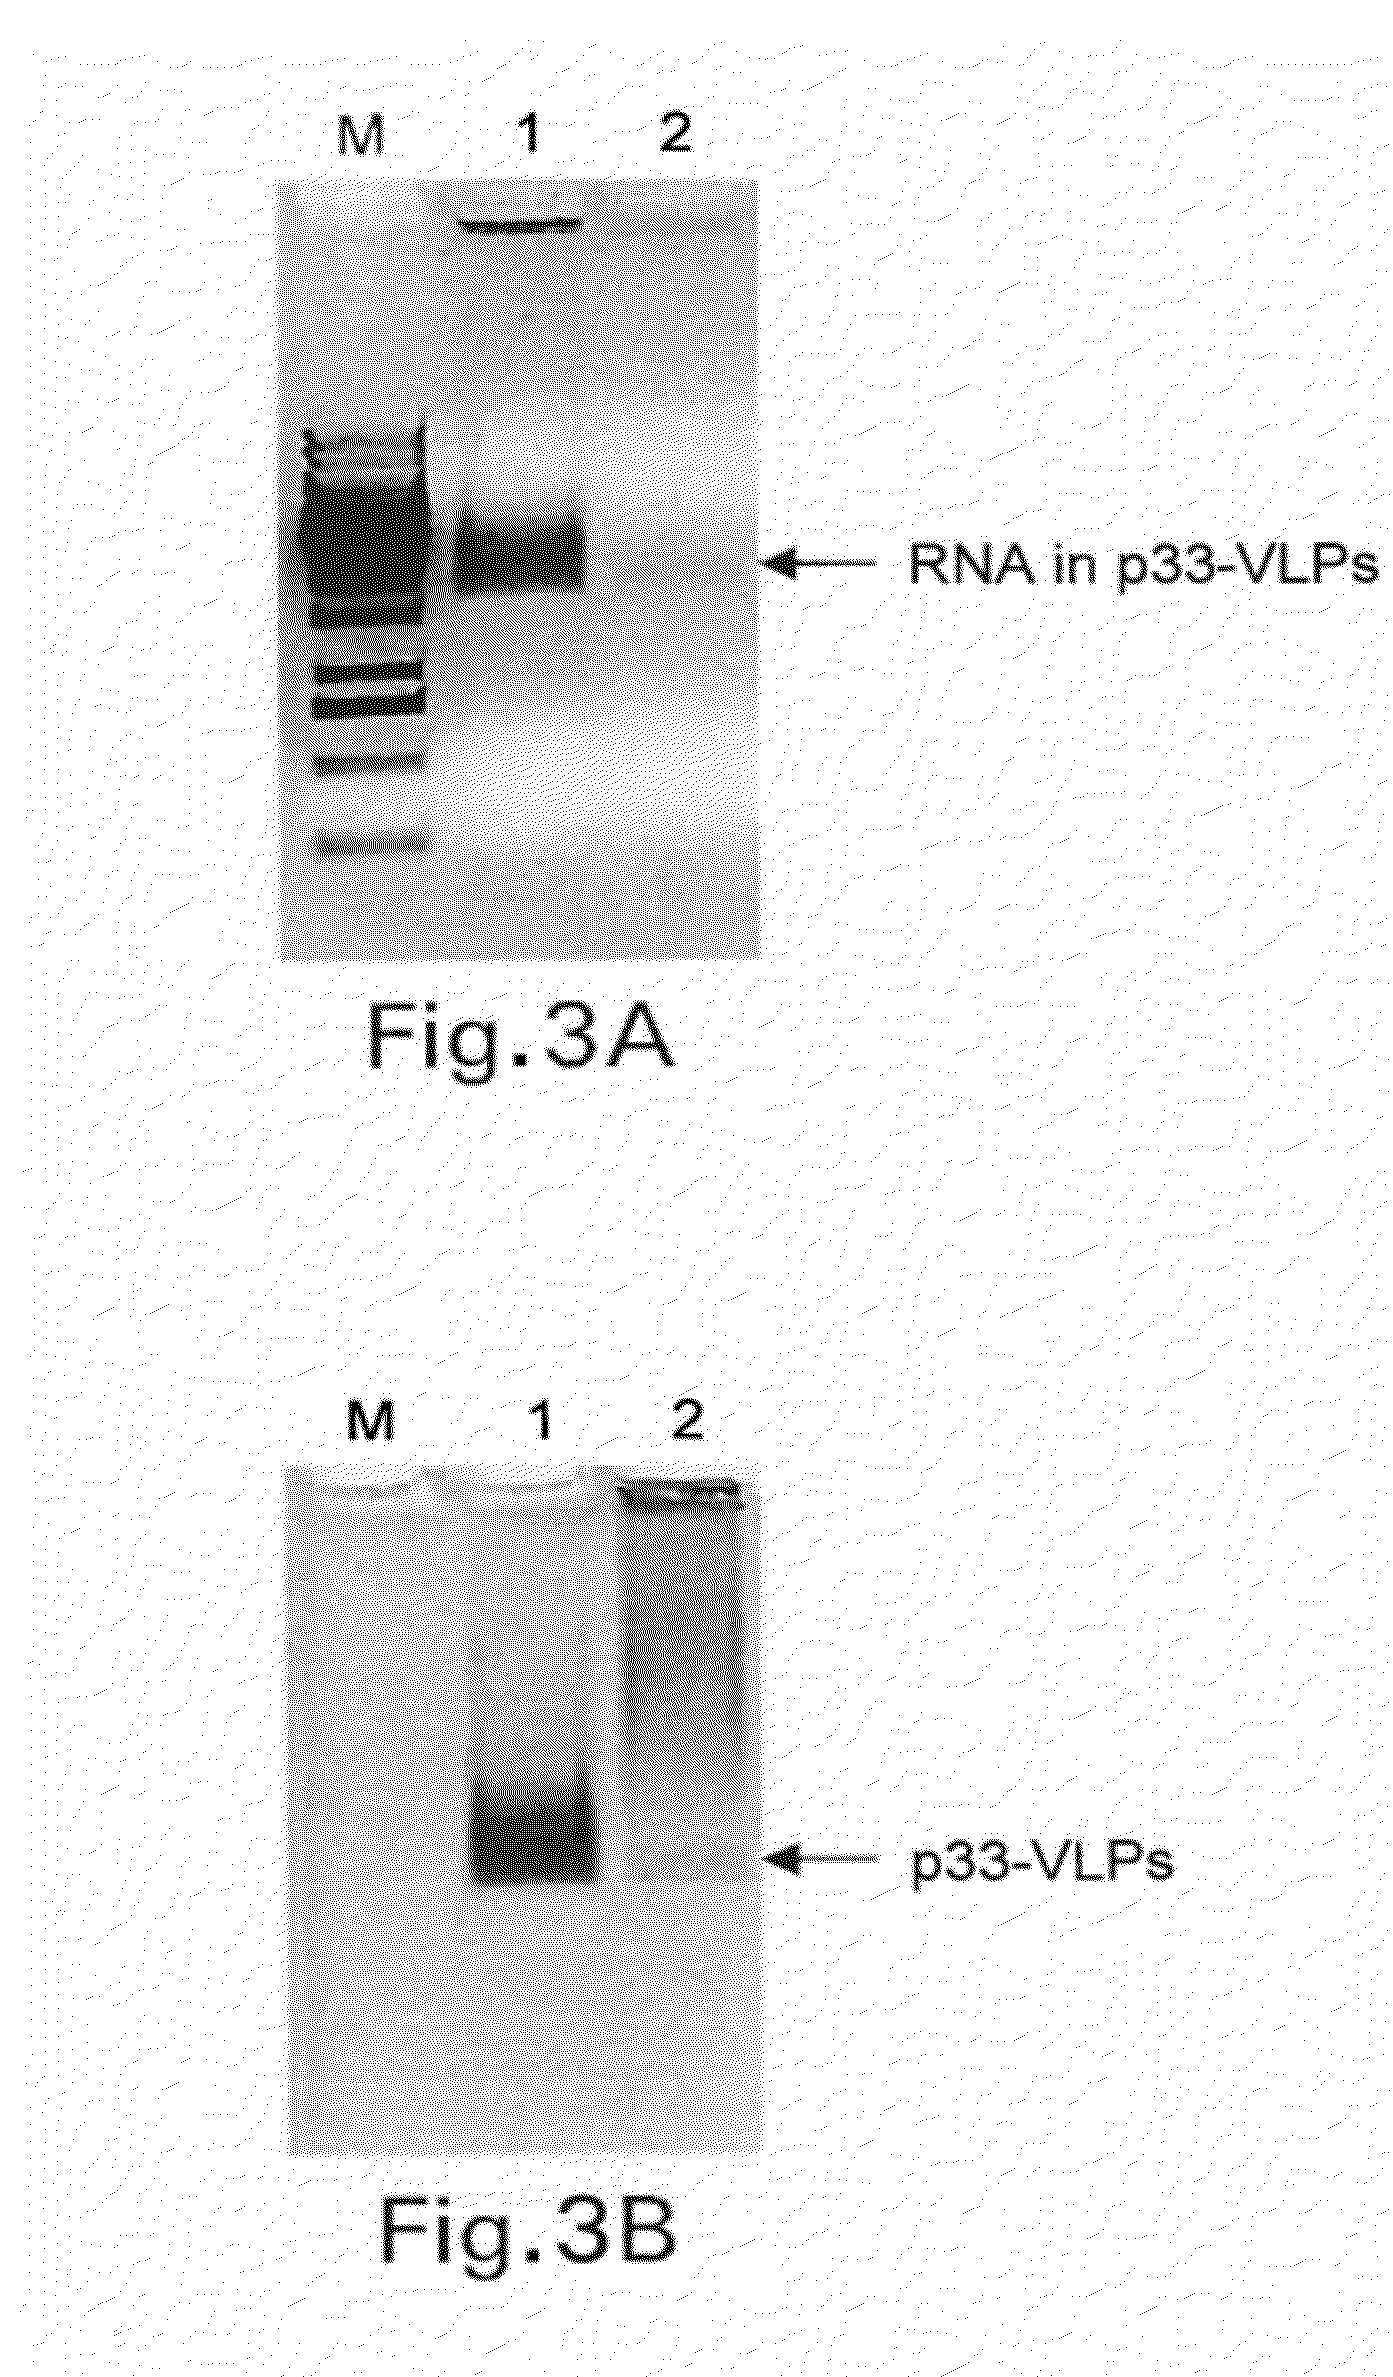 Packaging of Immunostimulatory Substances into Virus-Like Particles: Method of Preparation and Use